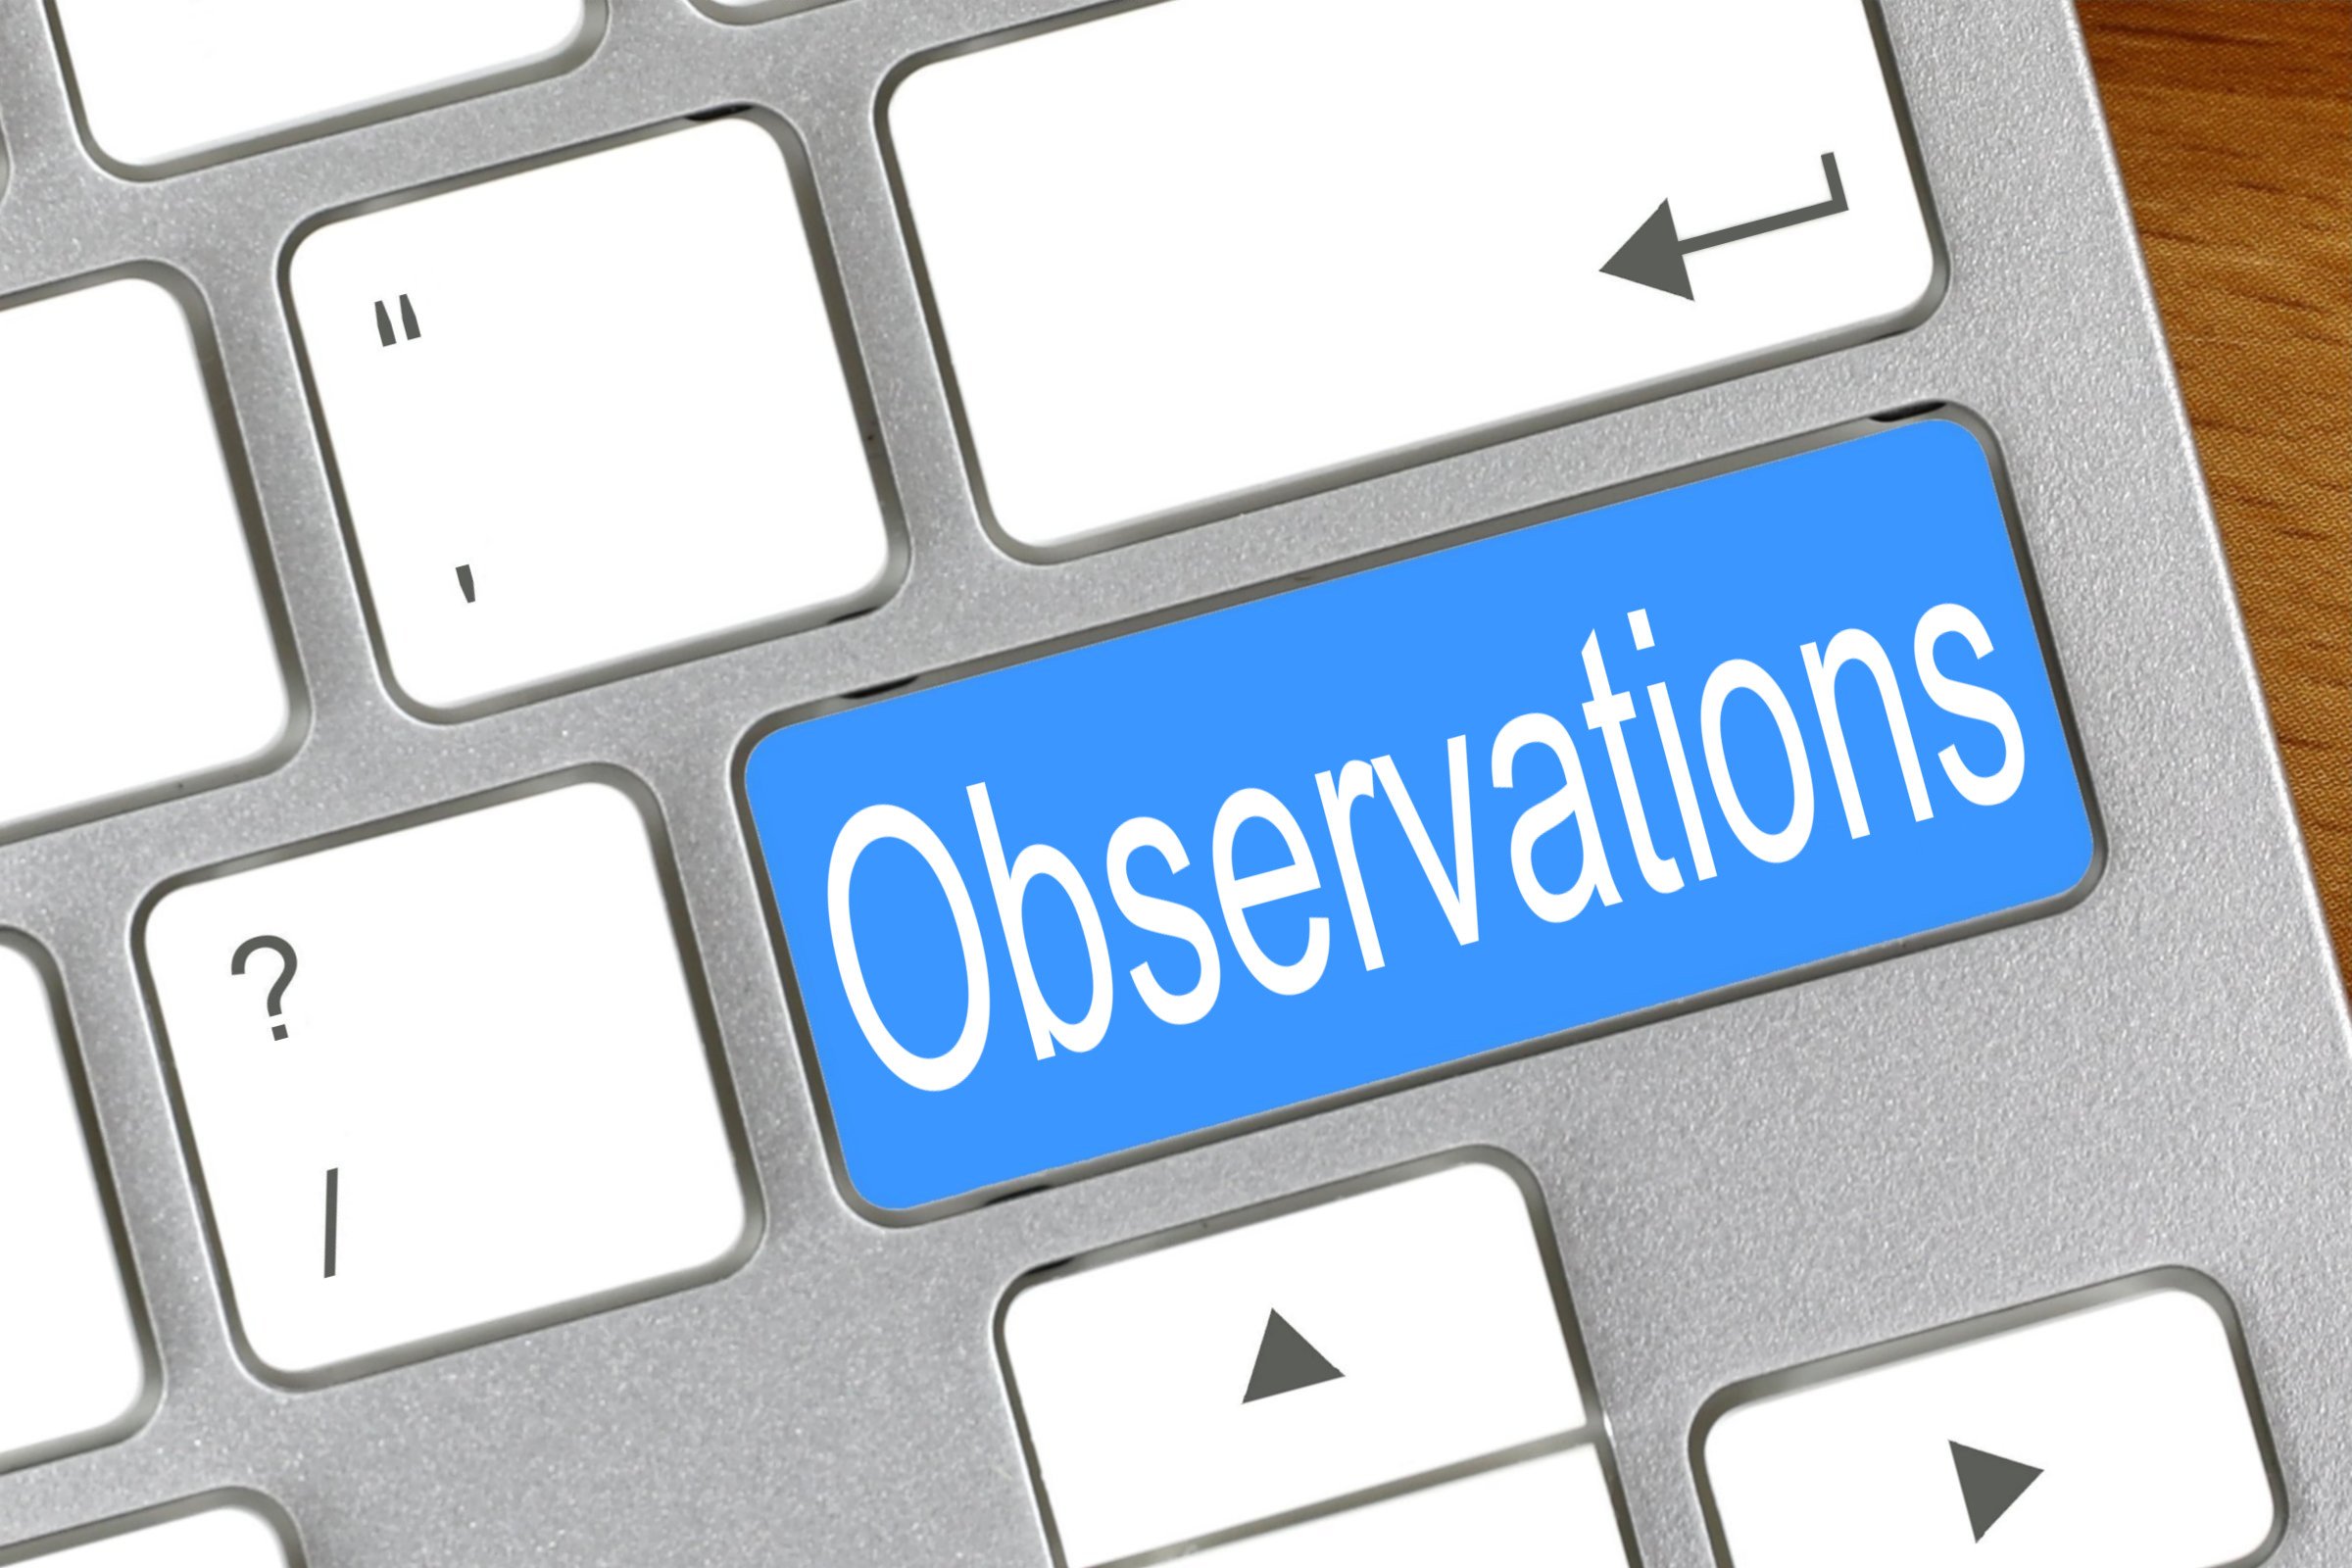 observations